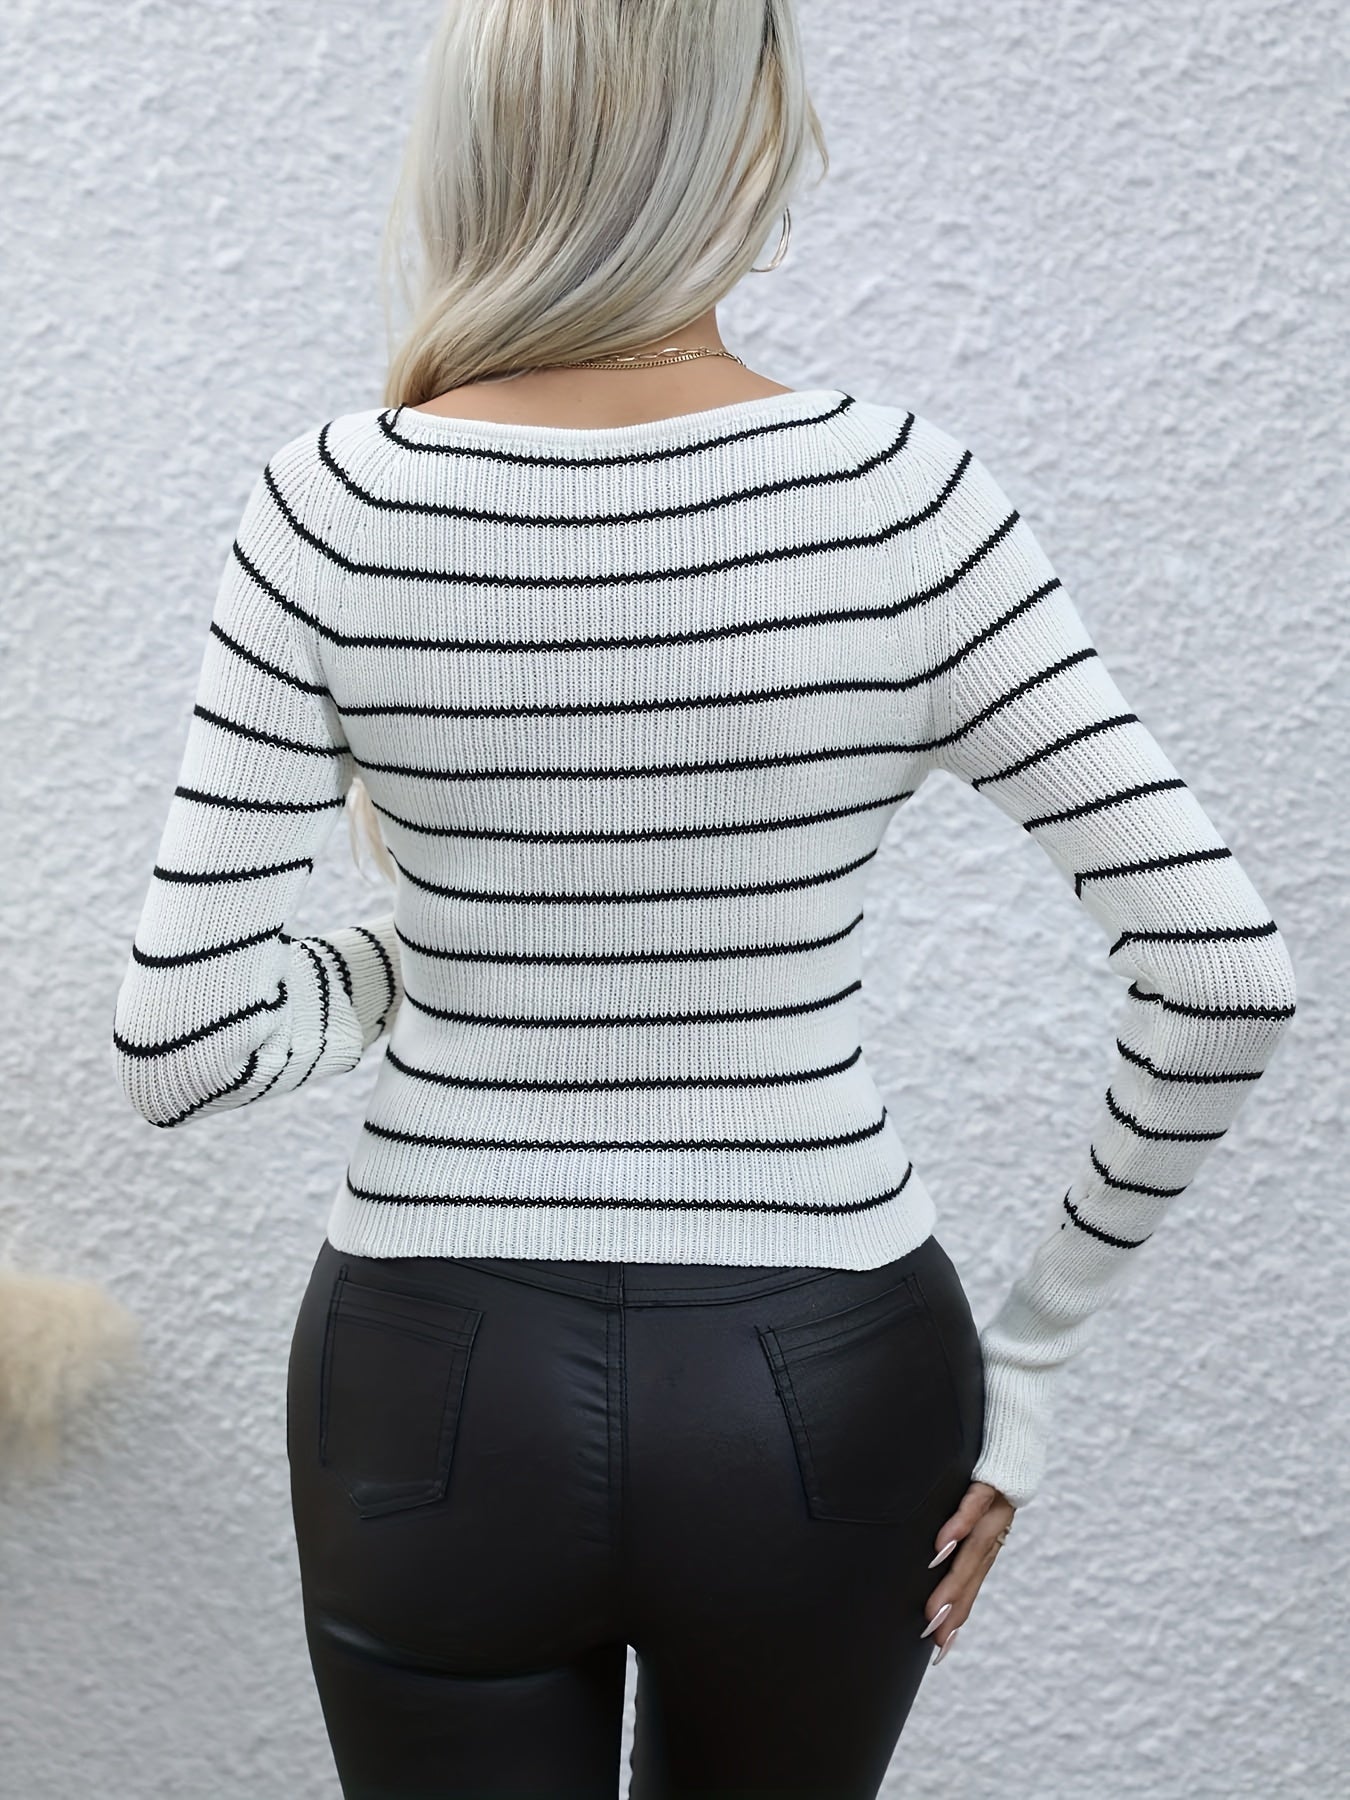 Antmvs Striped Slim Pullover Sweater, Casual Long Sleeve Sweater, Women's Clothing